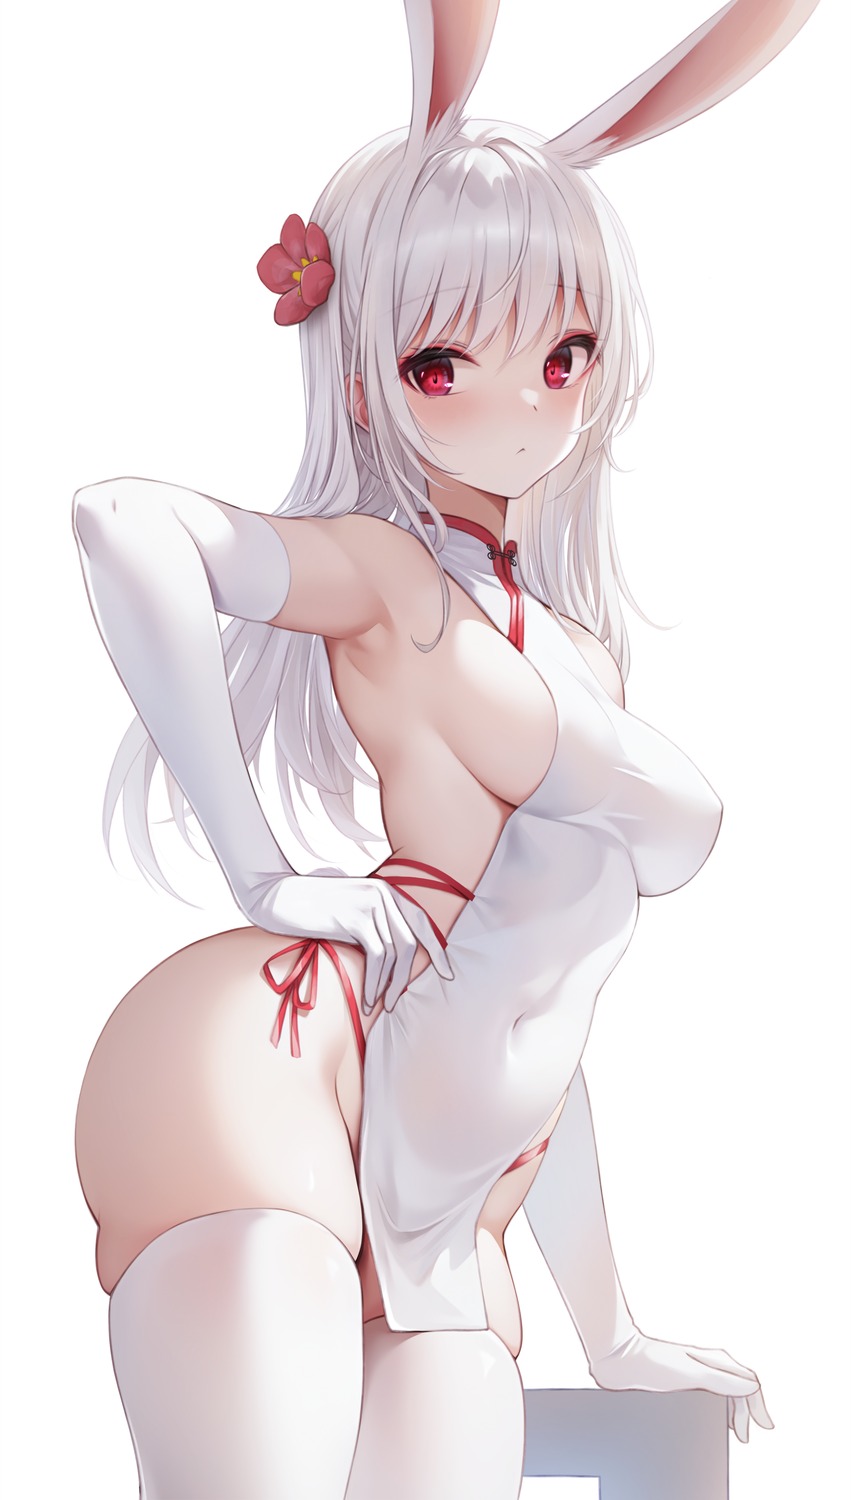 Bunny outfit hentai